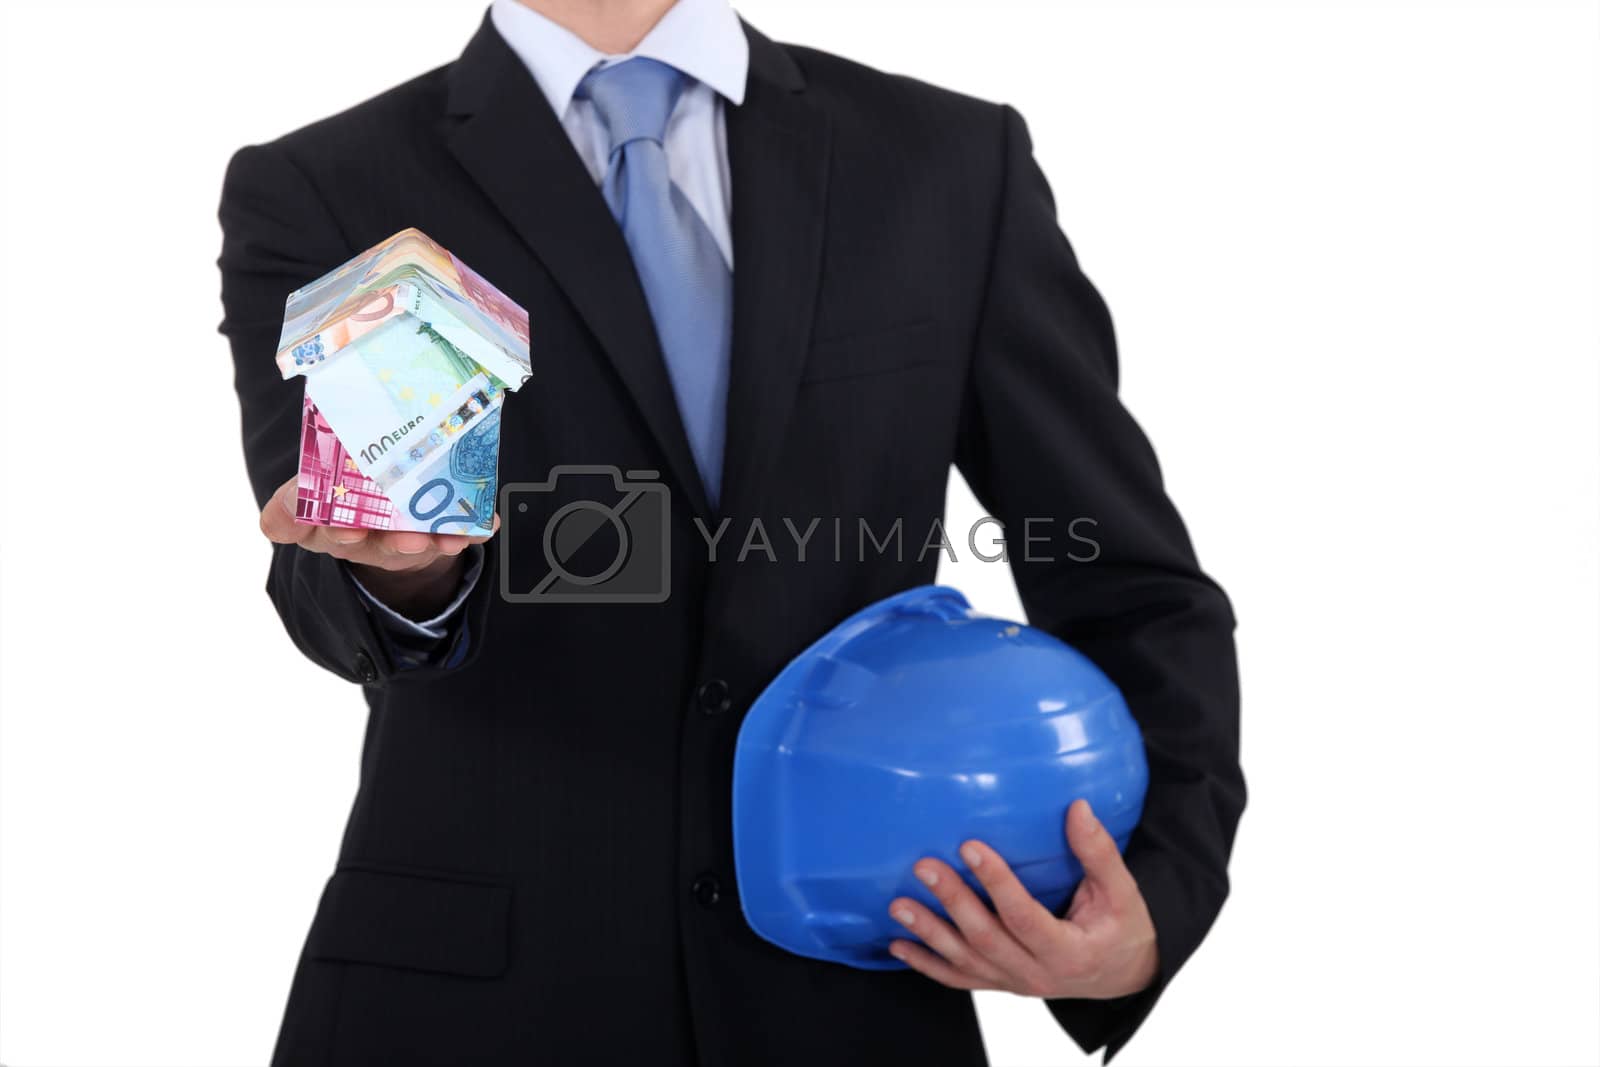 Royalty free image of The construction industry is on the rise by phovoir